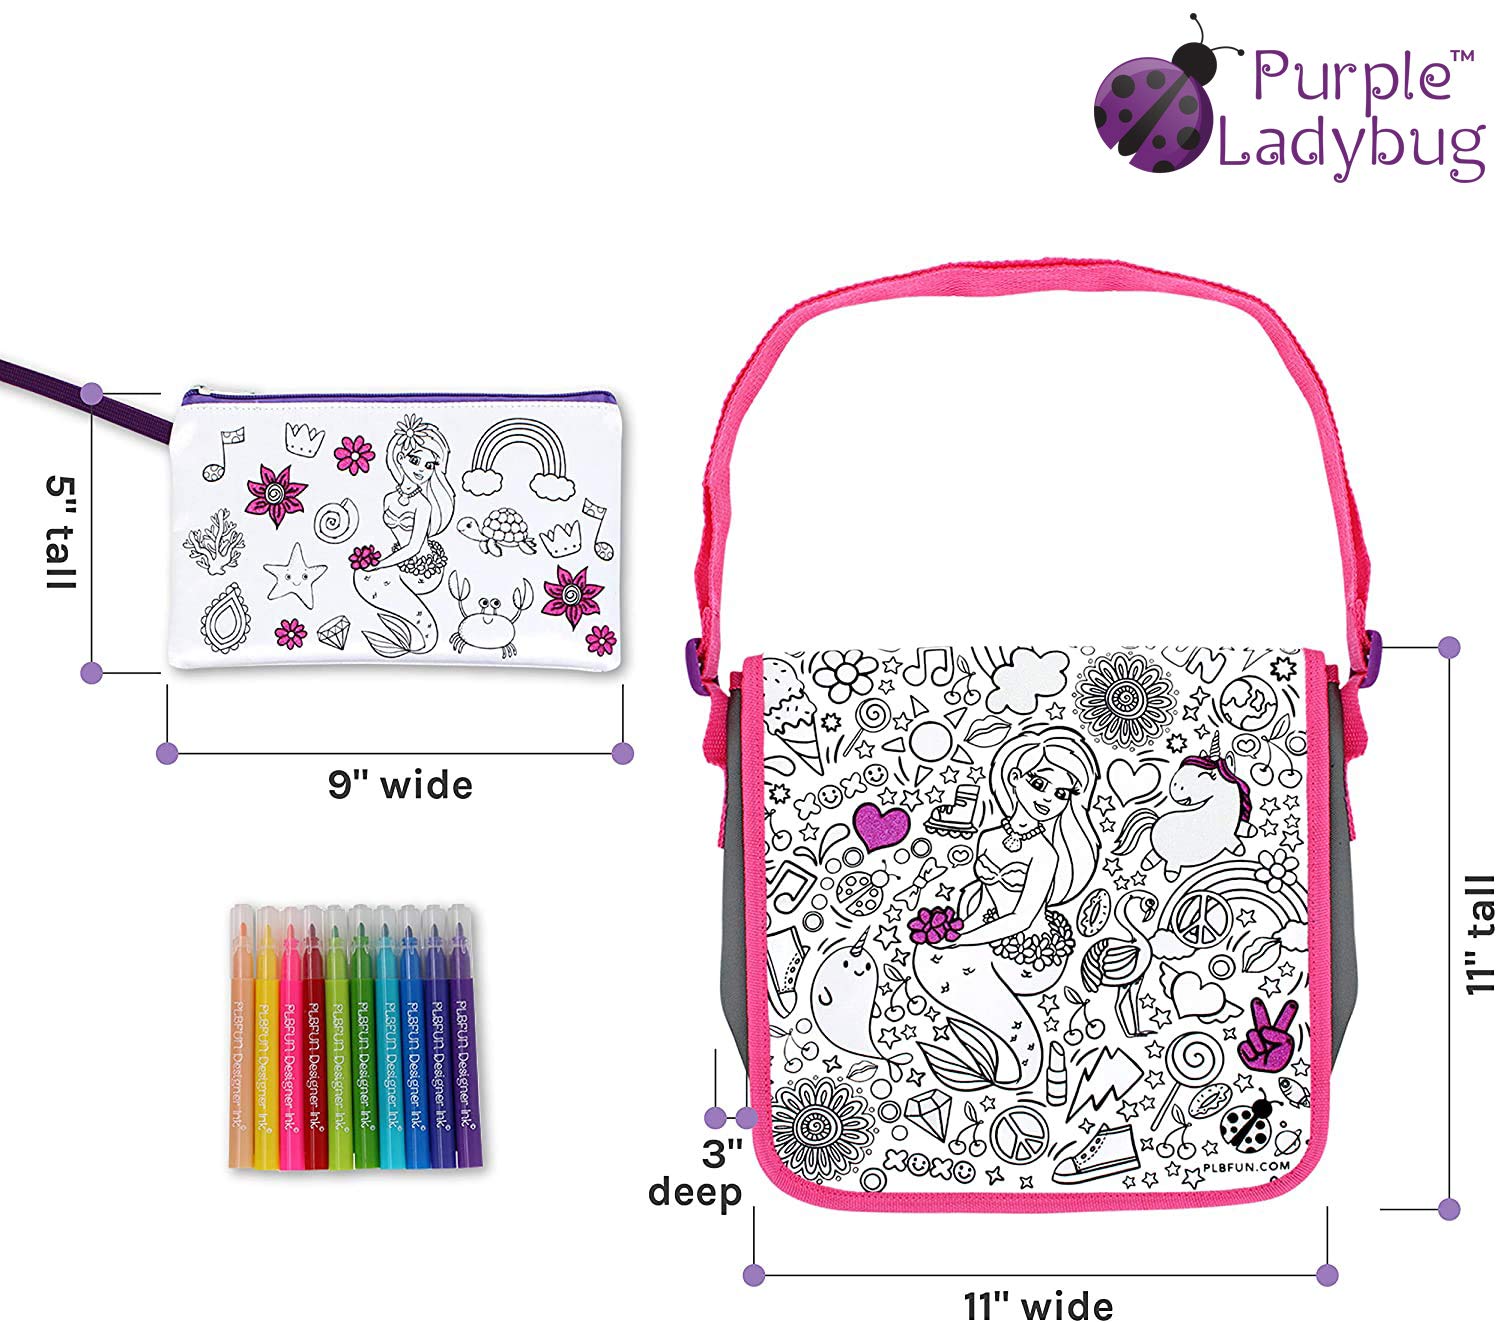 PURPLE LADYBUG Color Your Own Bag with 6 Markers - Unique Mermaid